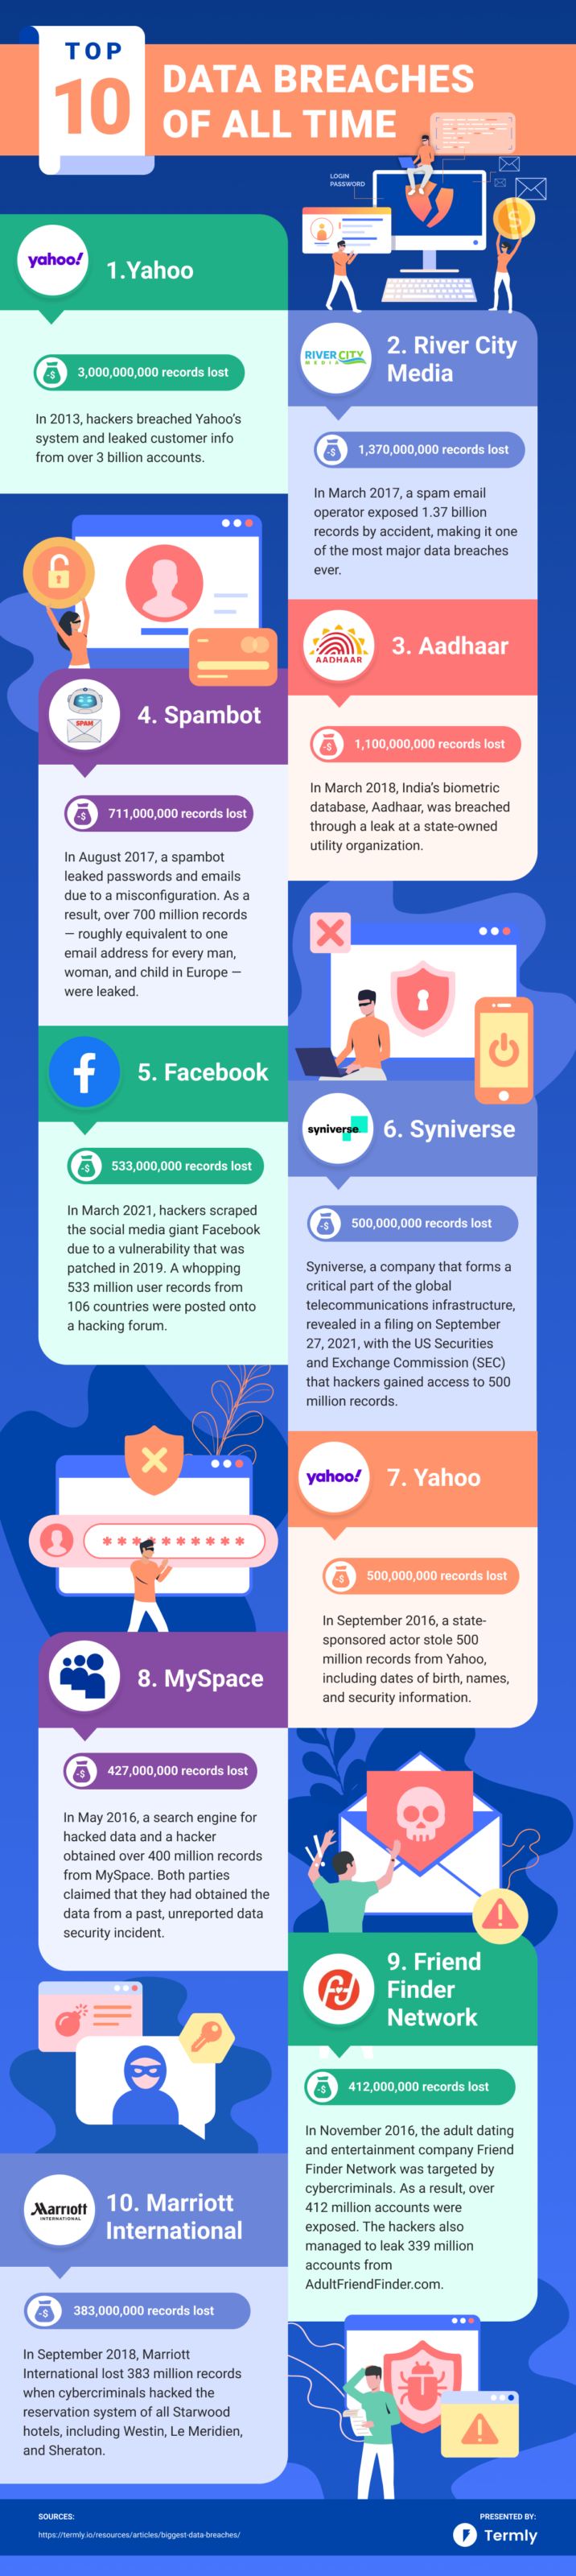 top 10 biggest data breaches of all time infographic